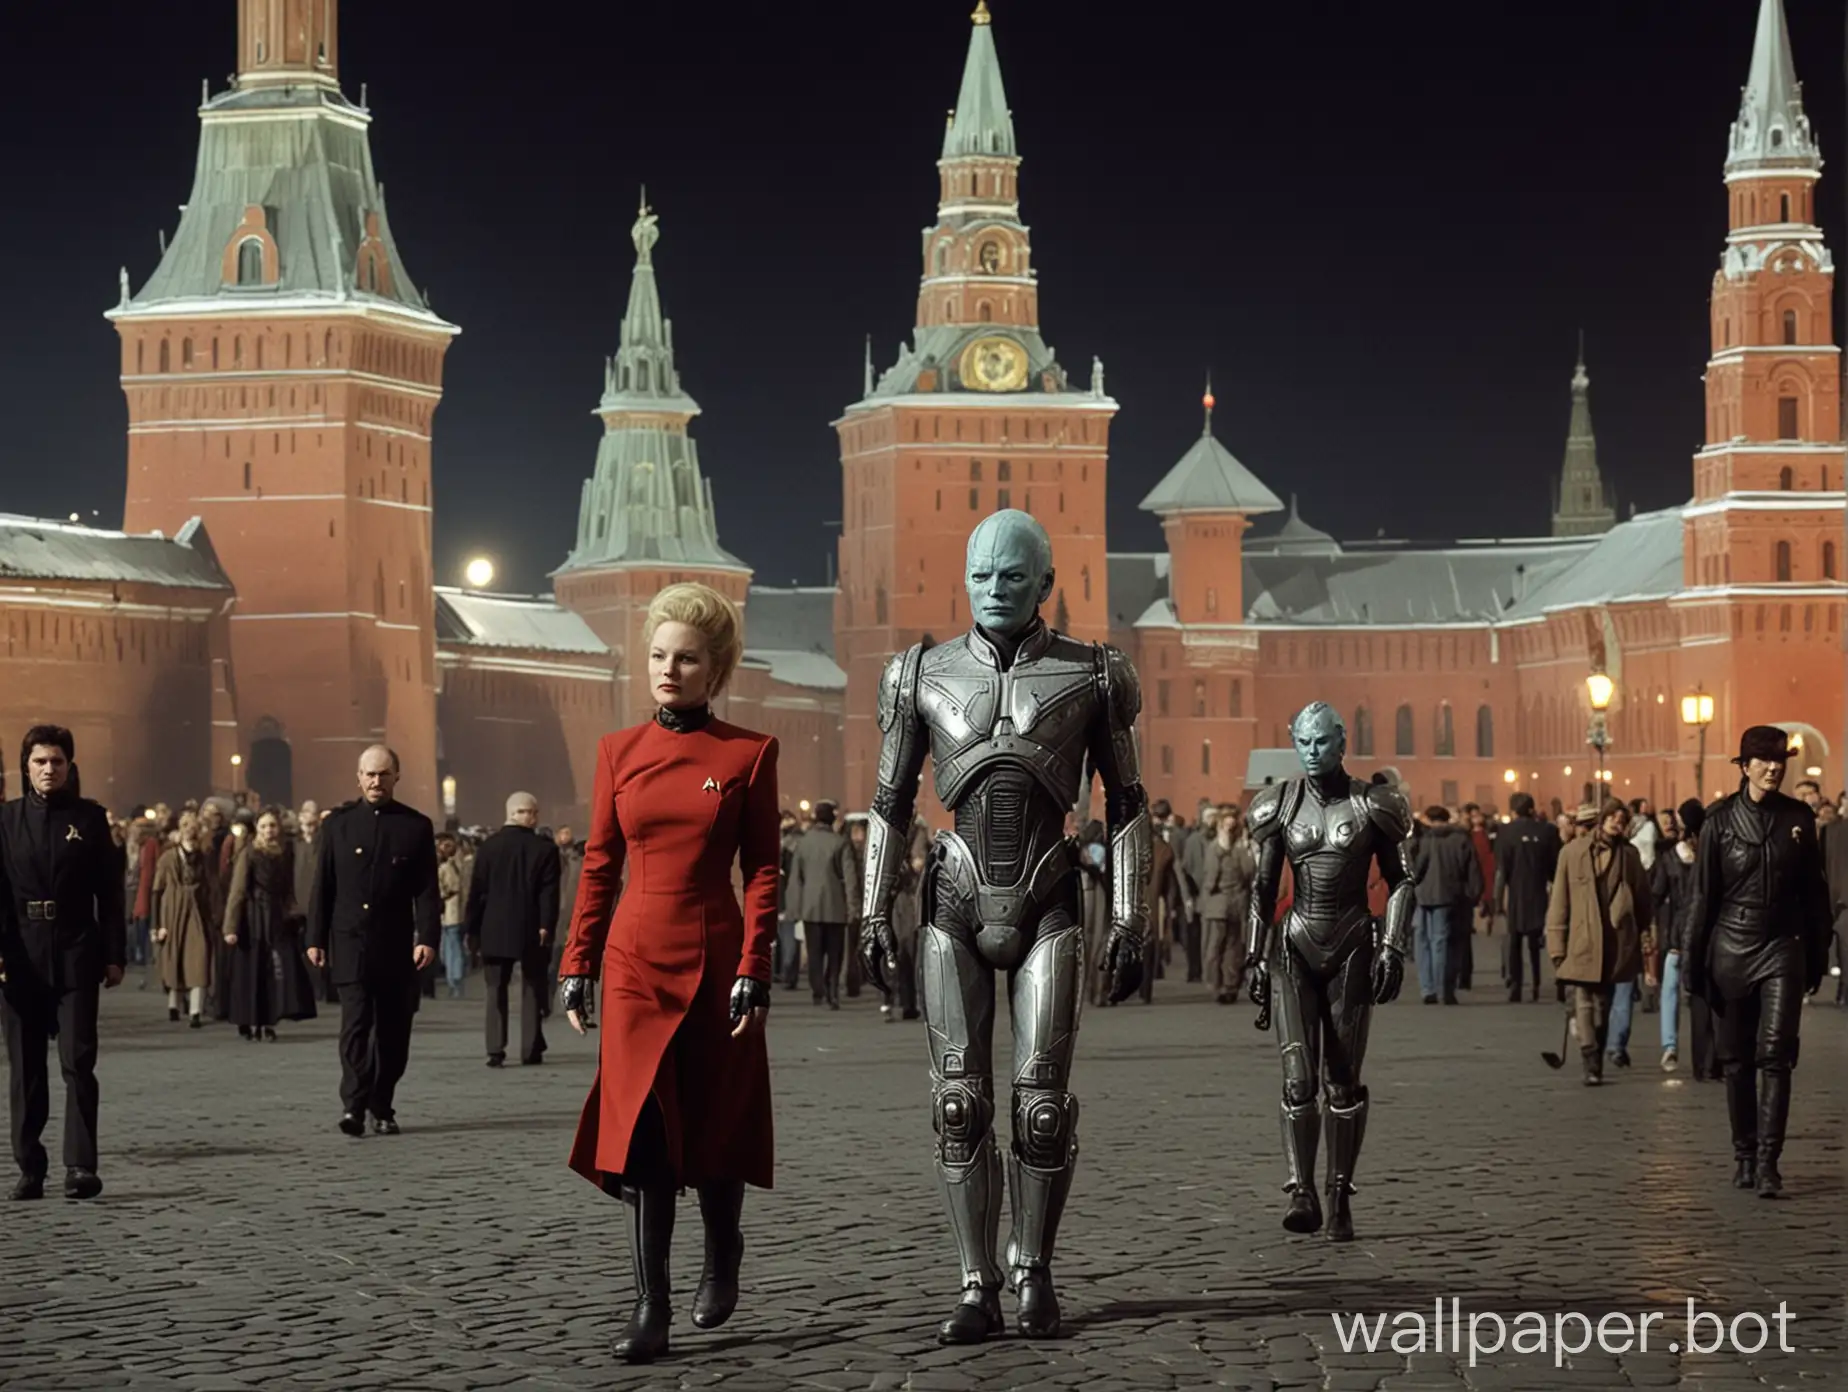 star trek voyager, the borg queen is walking on Red Square, genre science fiction